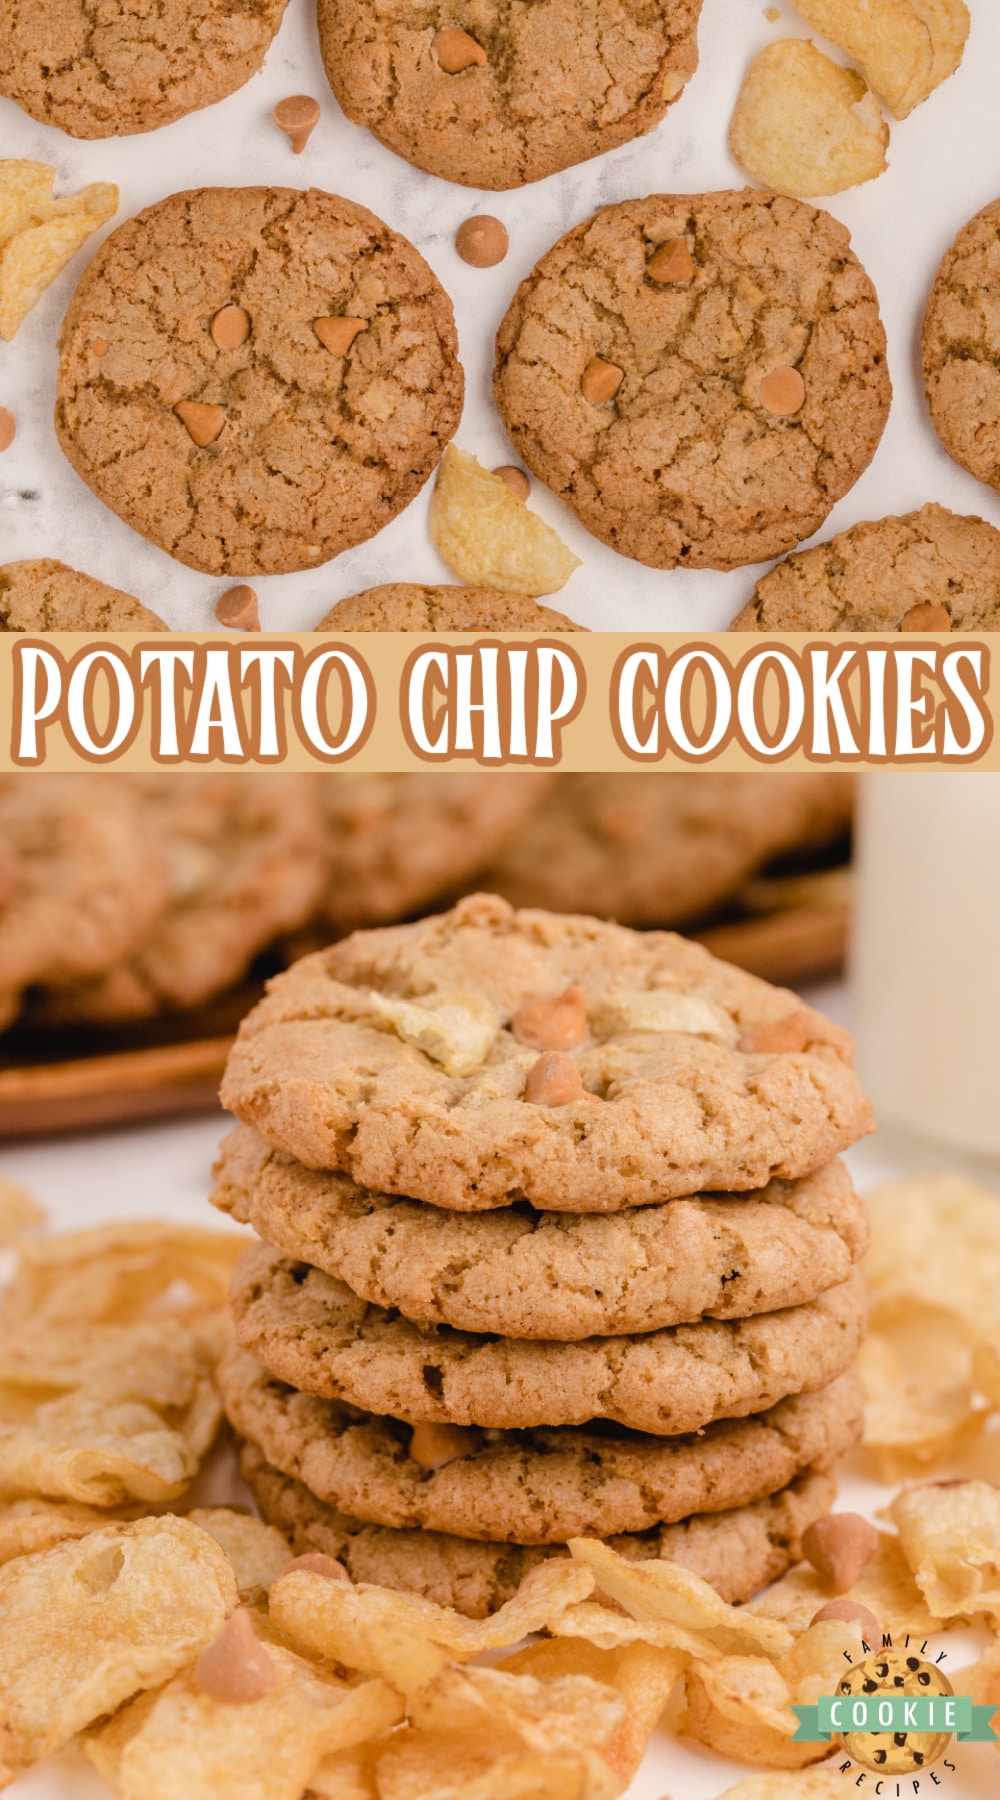 Potato Chip Cookies are the perfect combination of salty & sweet! Unique cookies made with butterscotch chips, potato chips, butter & brown sugar for incredible flavor!